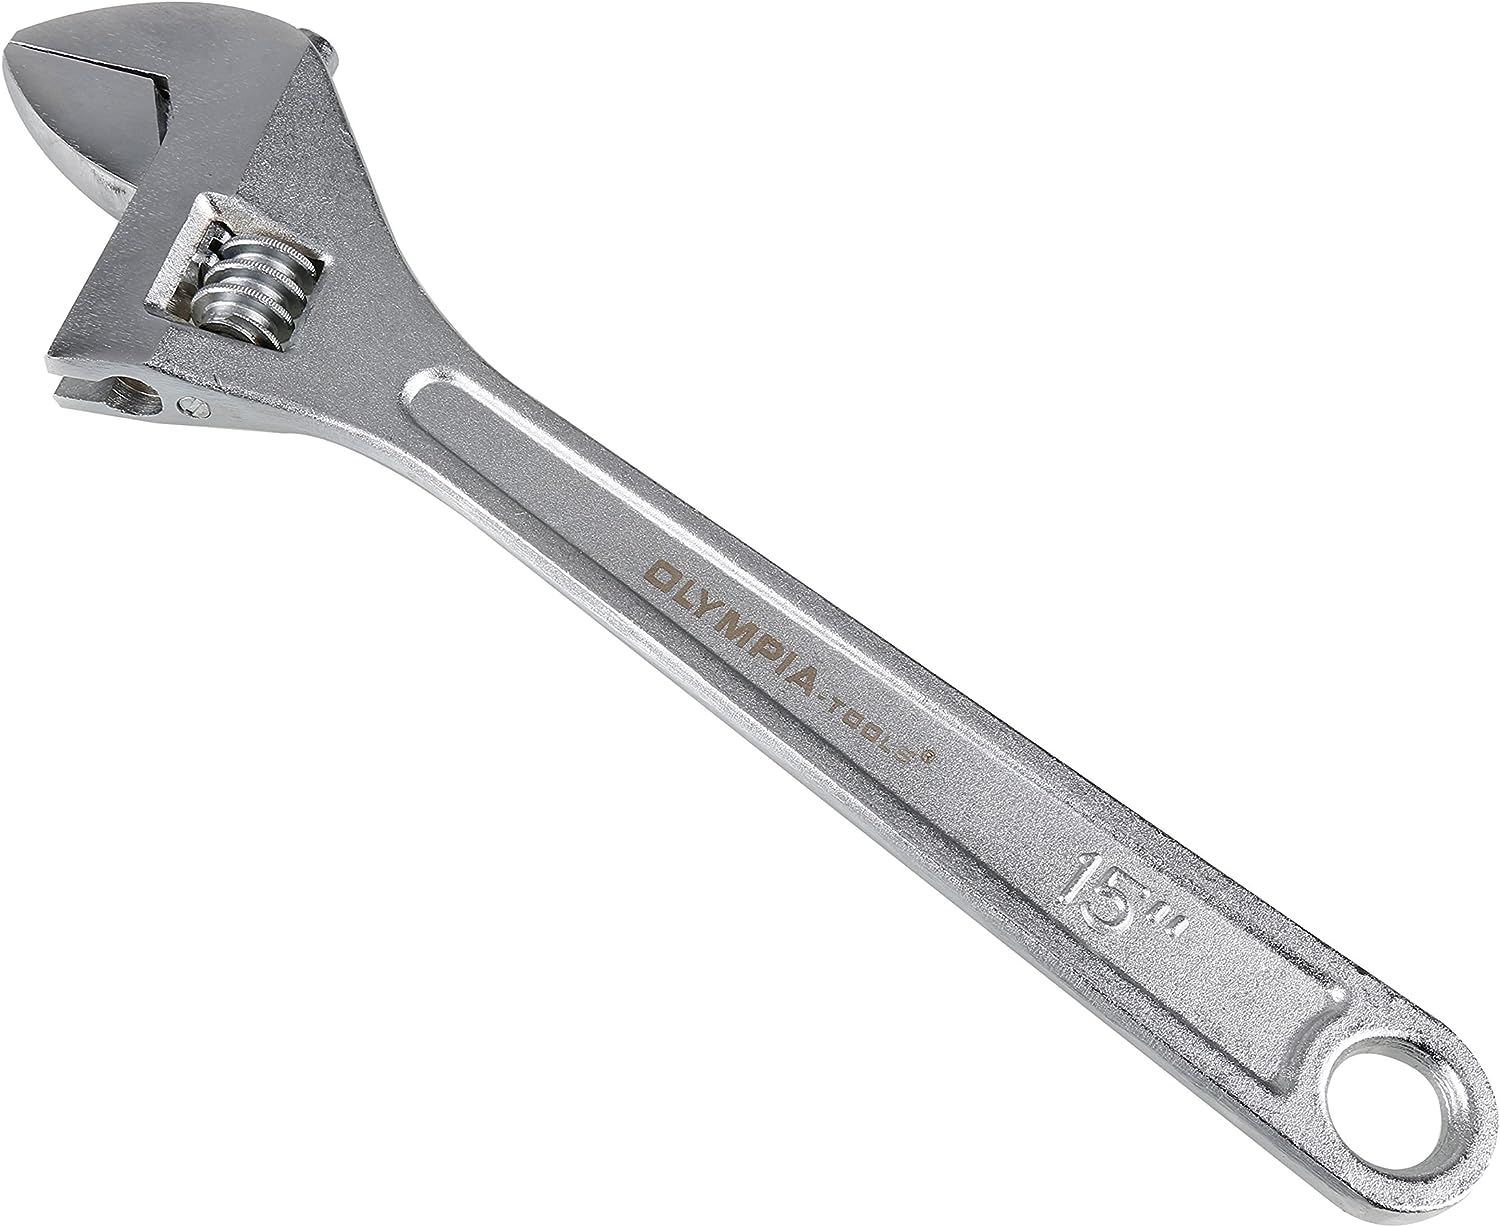 Olympia Tools Adjustable Wrench 01-015, 15 Inches